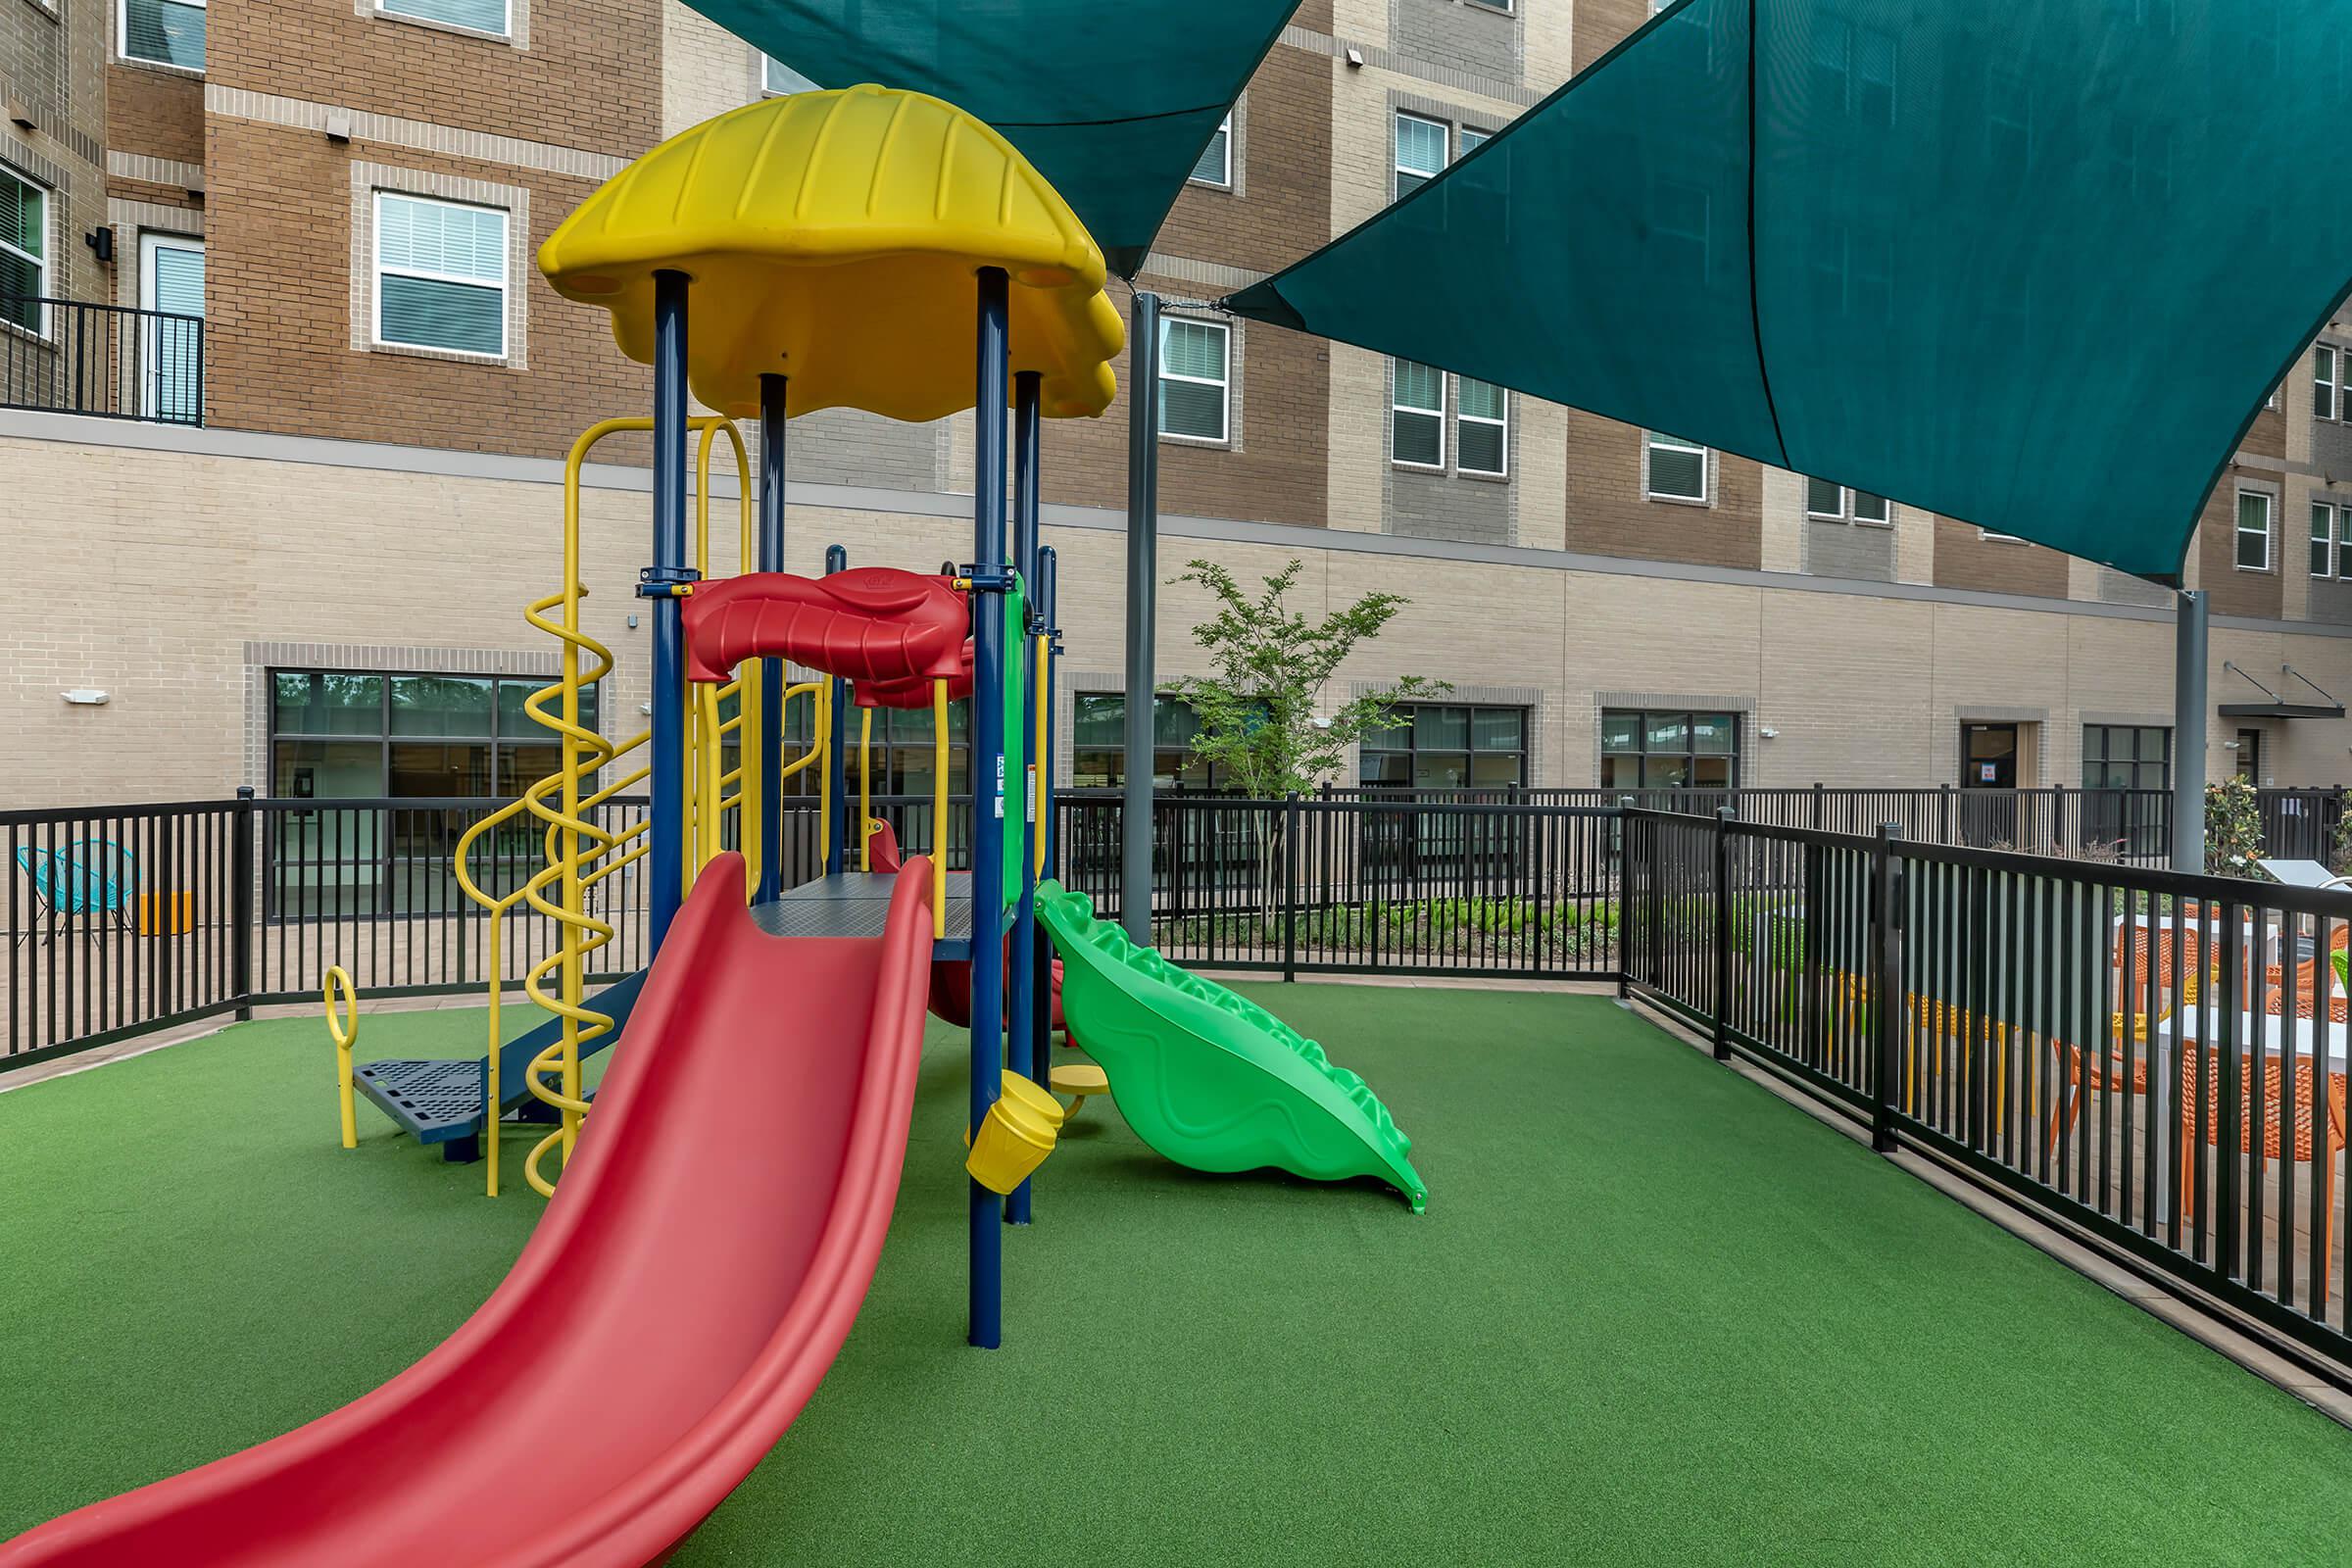 KIDS WILL LOVE THE FENCED PLAY AREA